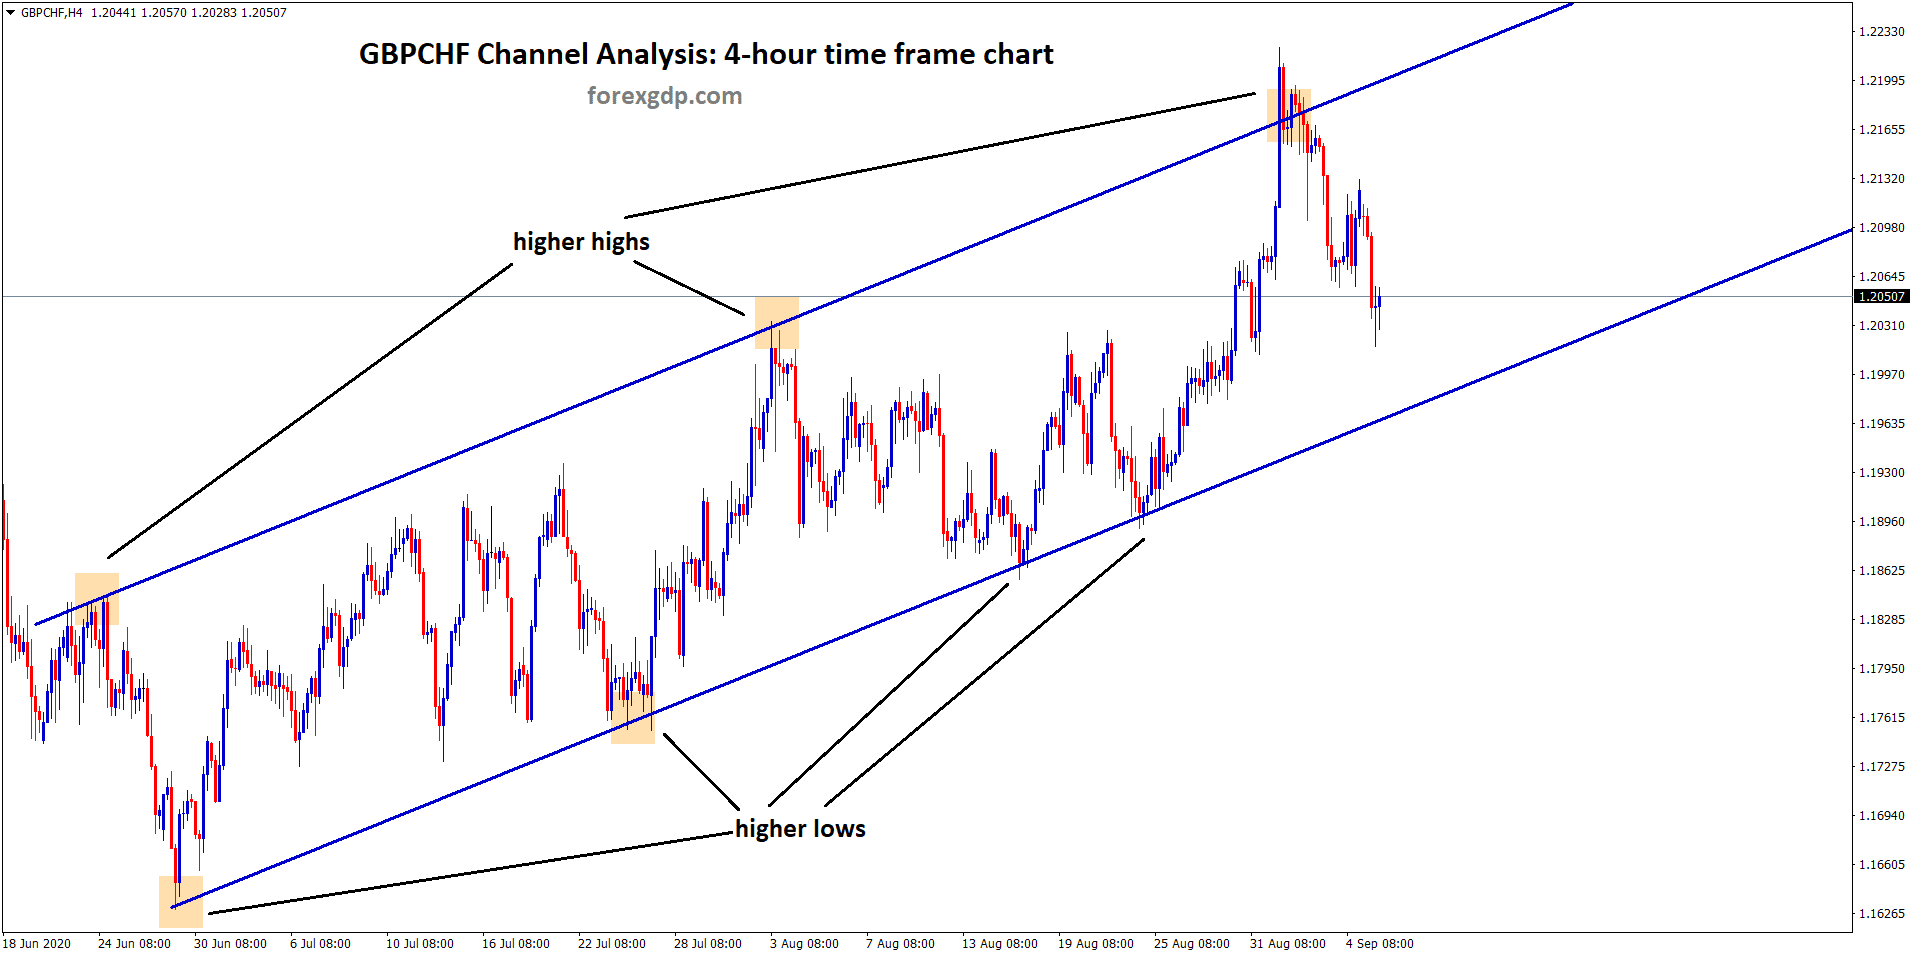 GBPCHF ascending channel analysis uptrend